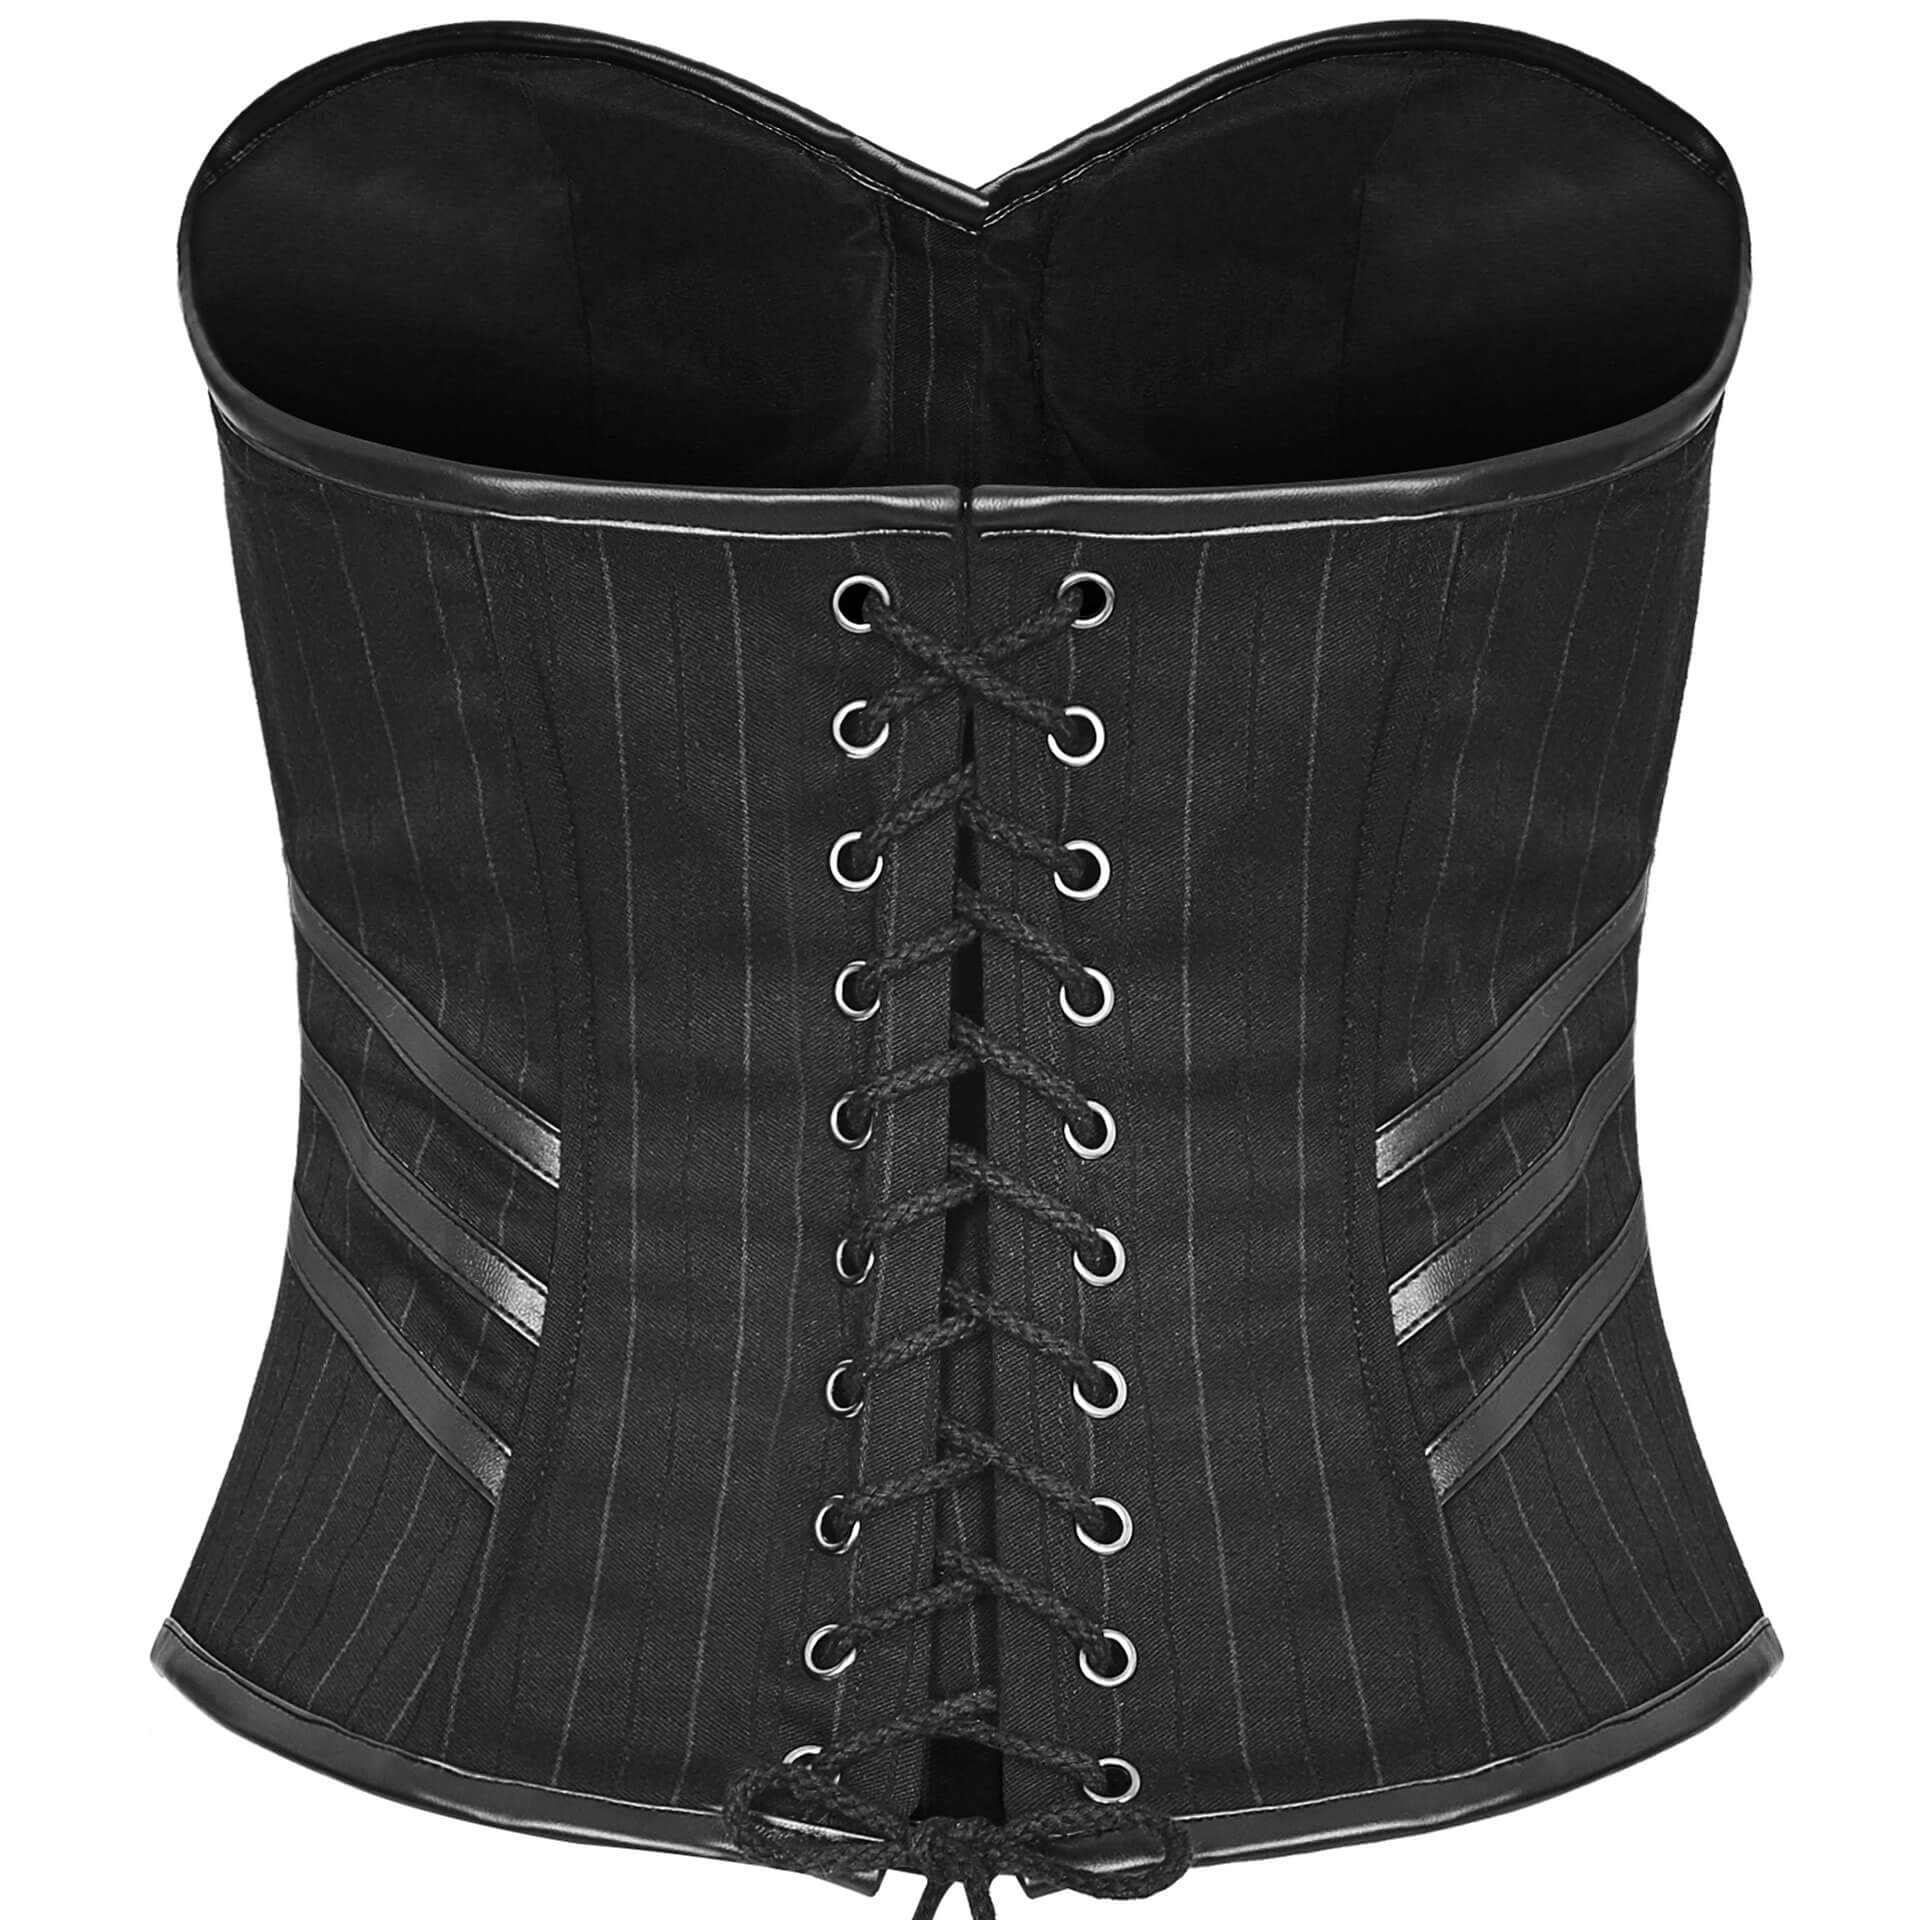 Inquisitor Corset Vest by Punk Rave brand